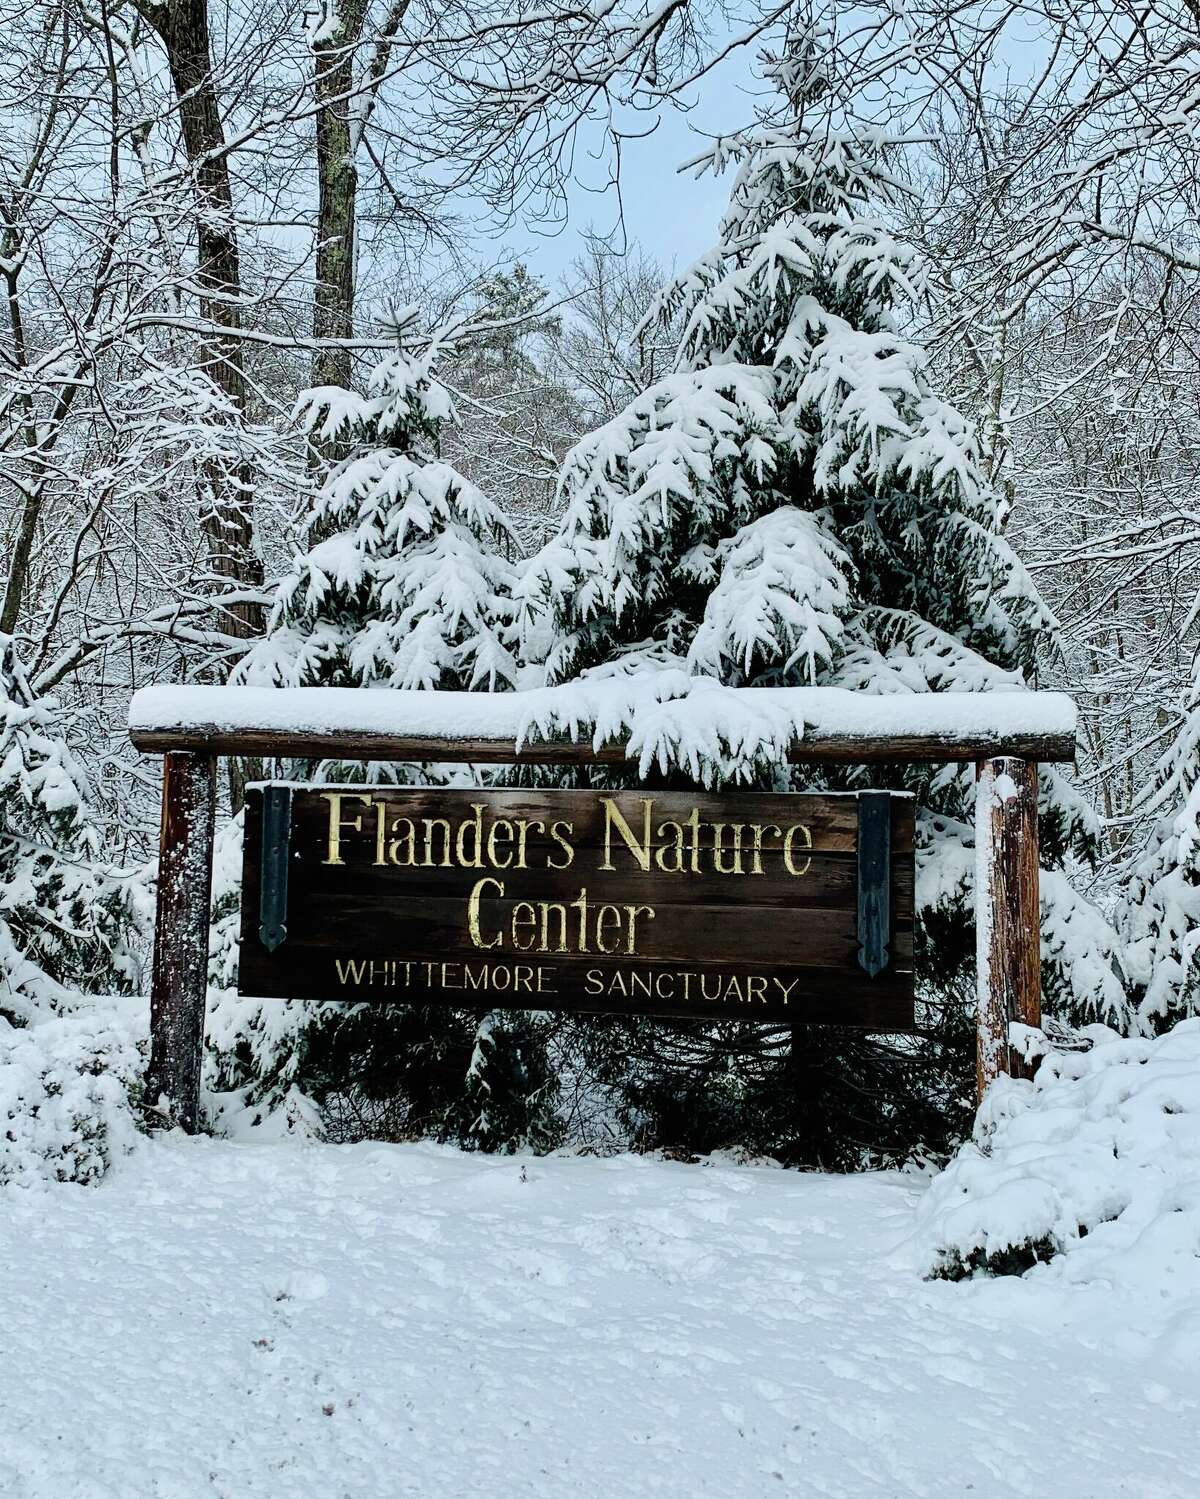 Flanders Nature Center & Land Trust recently announced that it has acquired 19 acres parcel of land at Terrell Road in Woodbury. The property connects to Flanders’ largest preserve, The Whittemore Sanctuary .